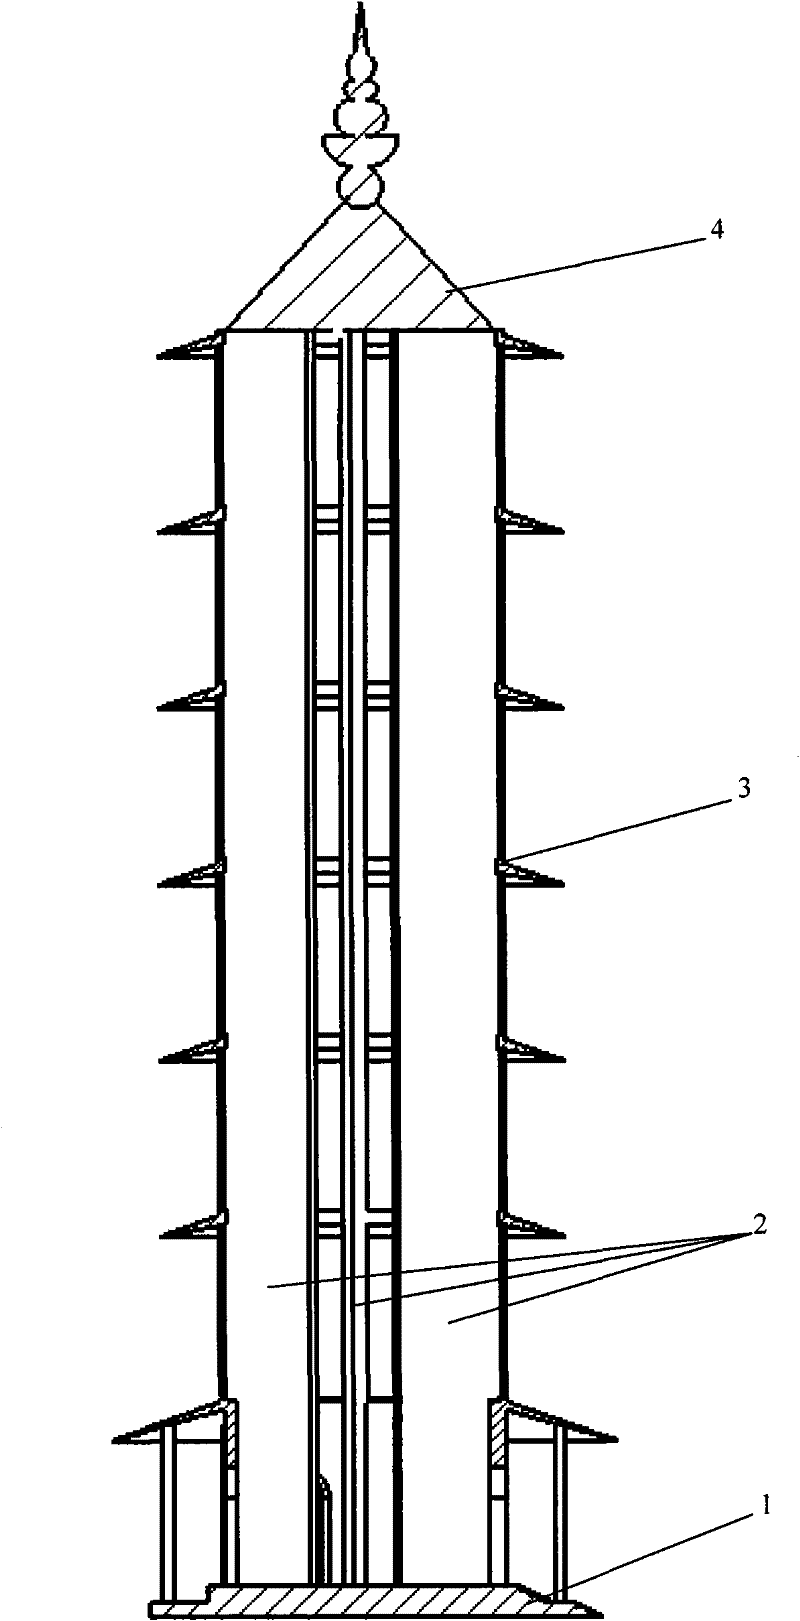 Rectification speed increasing tower used for vertical axis wind turbine